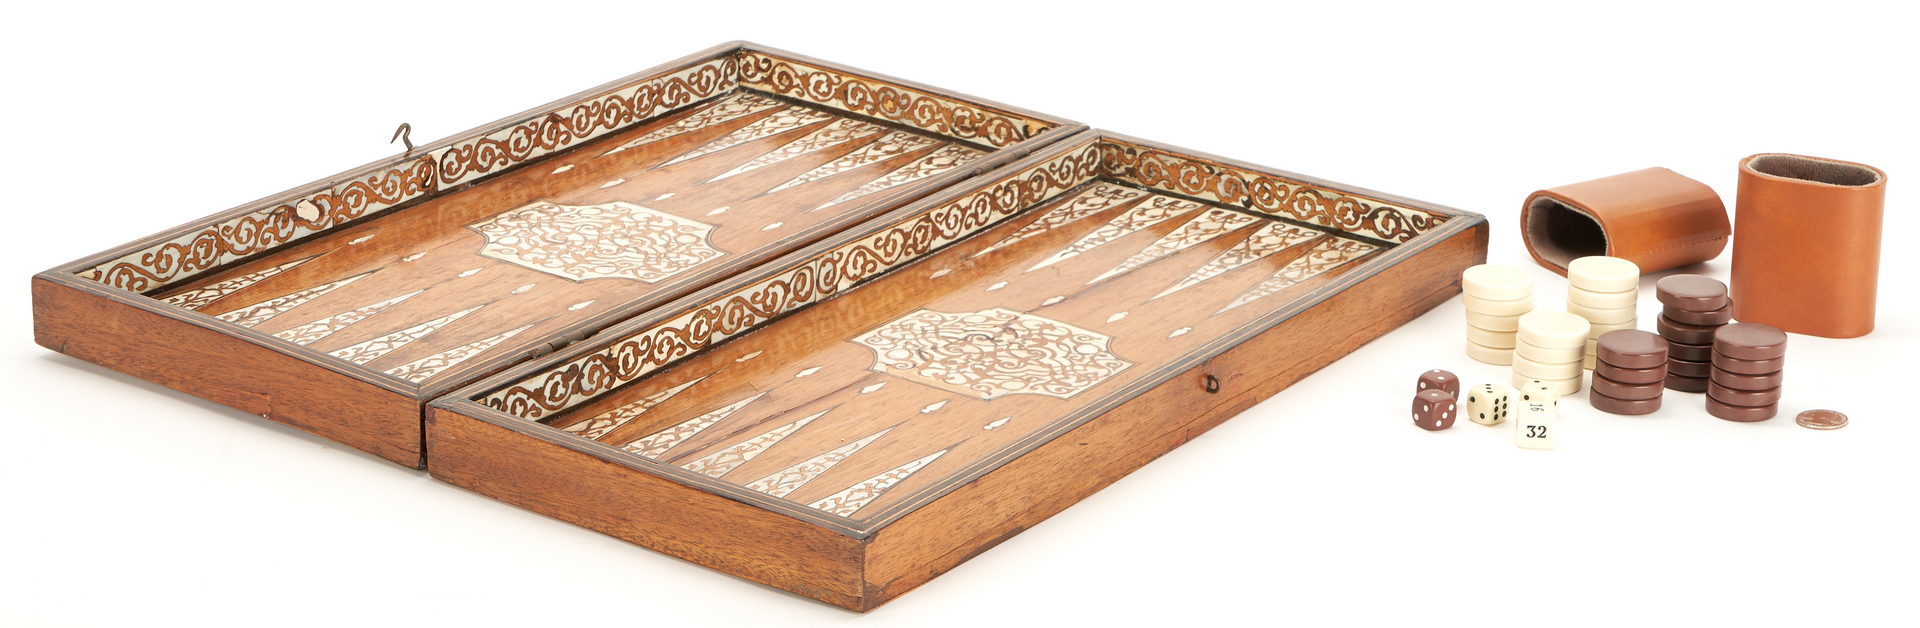 Lot 1030: 2 Inlaid Wooden Game Boxes